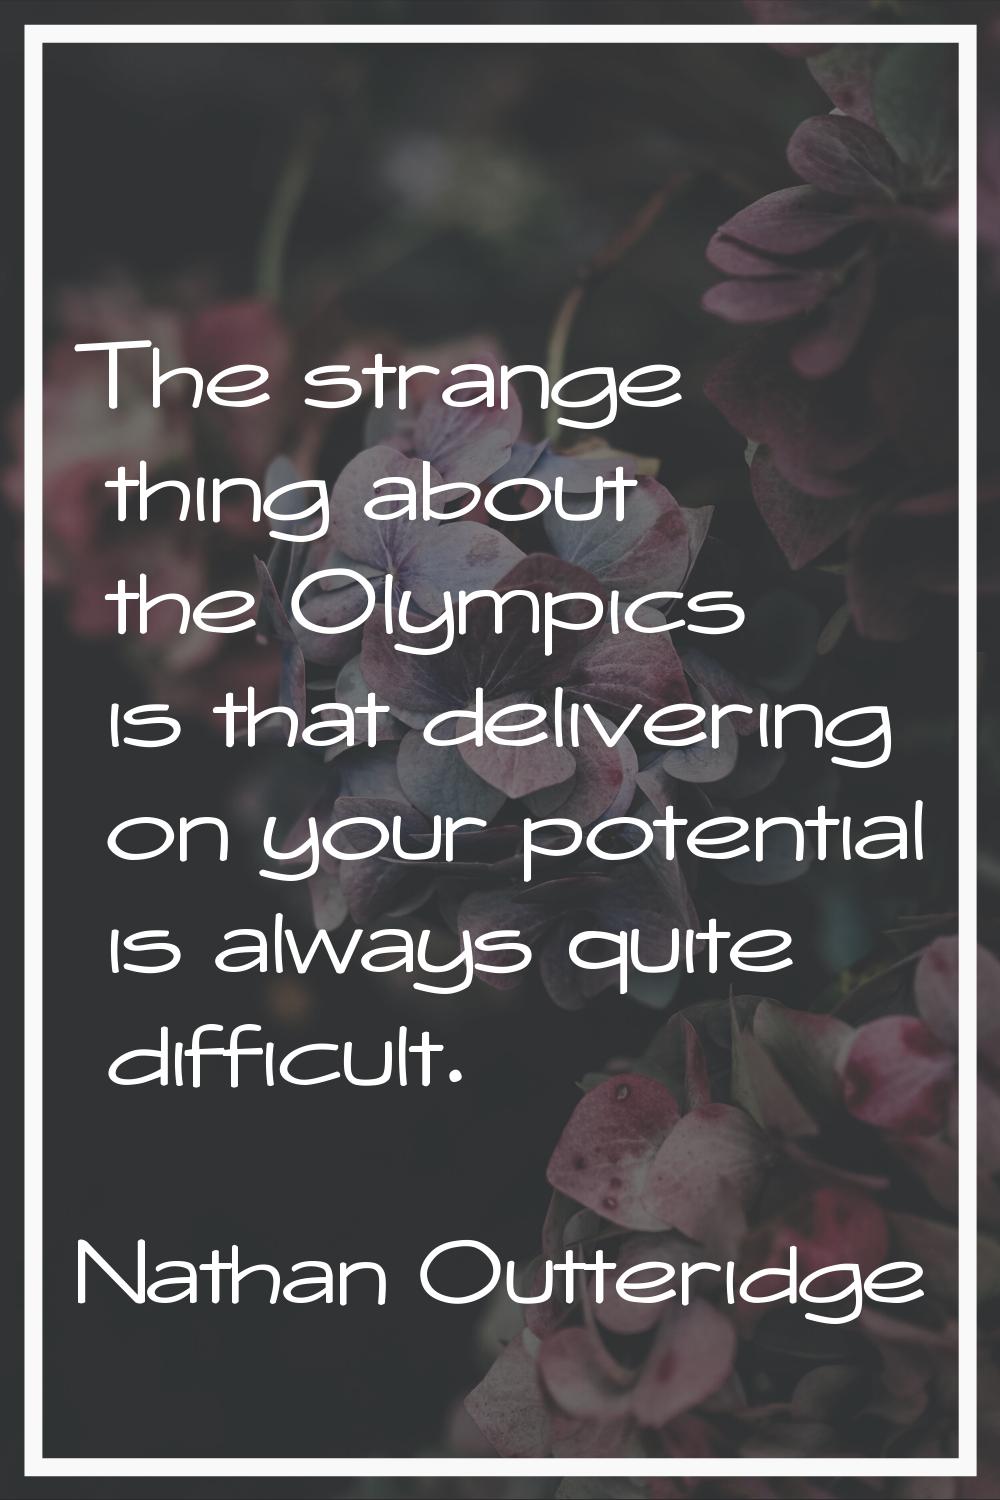 The strange thing about the Olympics is that delivering on your potential is always quite difficult